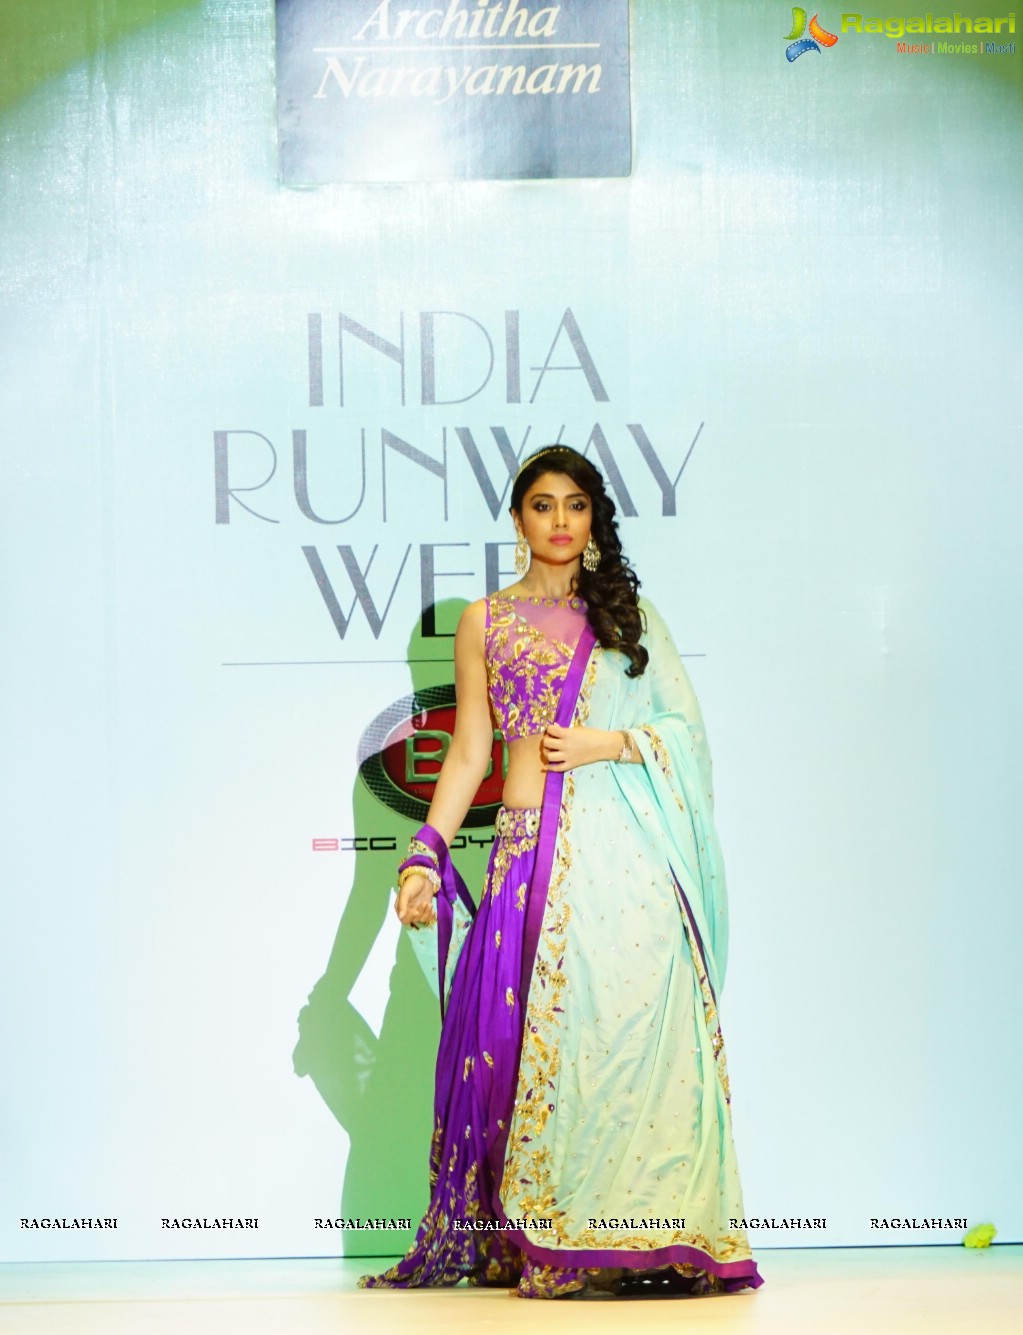 Architha Narayanam Showcases Collection - Songstress of Love at the India Runway Week